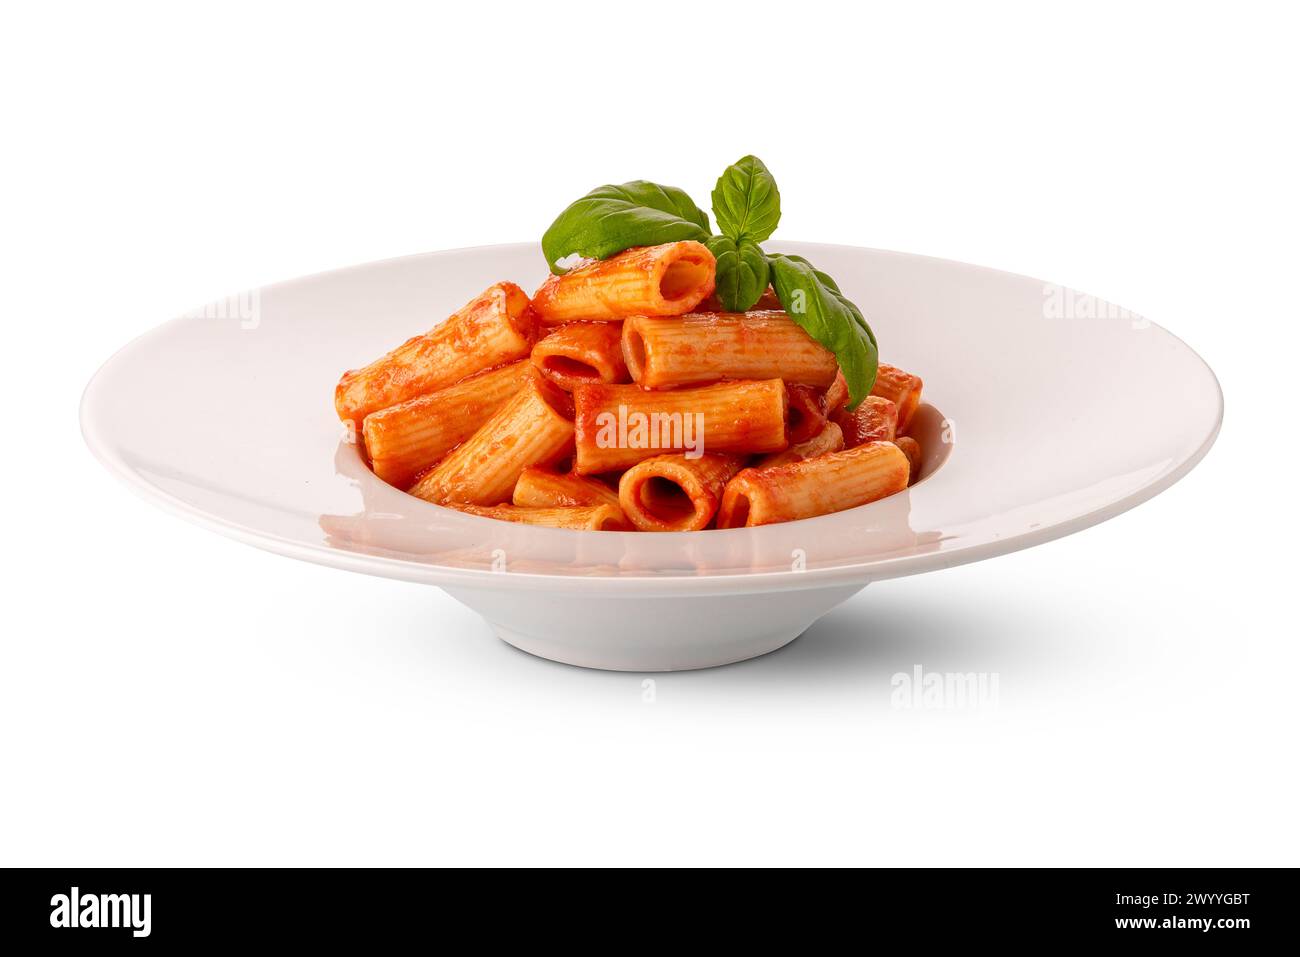 Rigatoni macaroni pasta with tomato sauce and basil leaves in white plate isolated on white with clopping path included Stock Photo